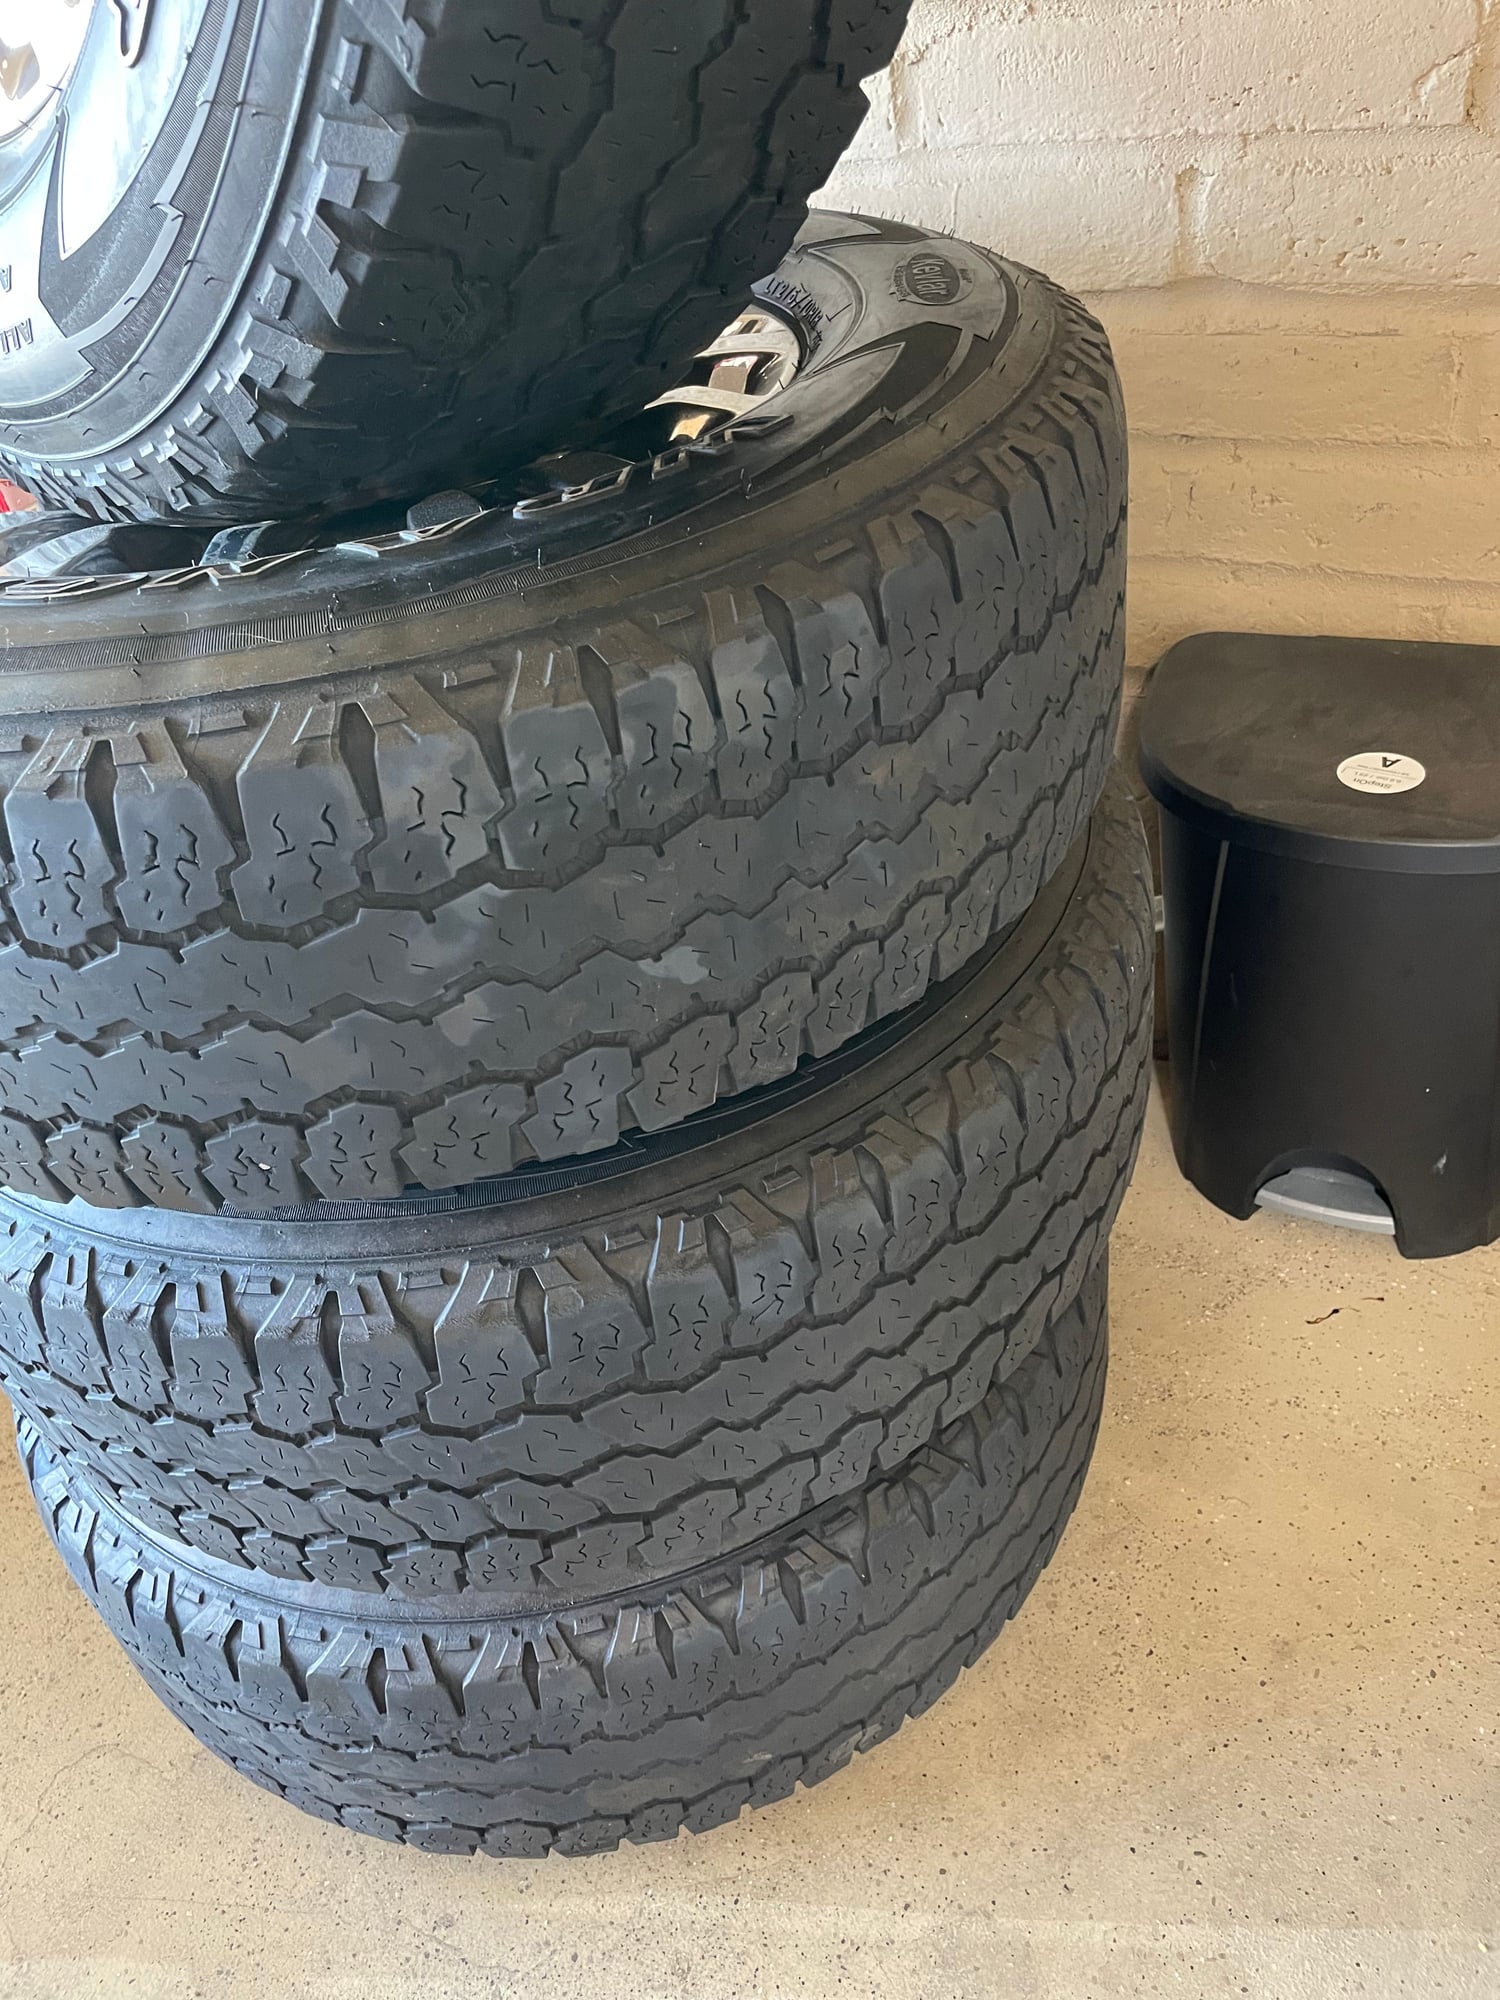 Wheels and Tires/Axles - 2020 F250 Wheels - Used - 0  All Models - Tucson, AZ 85750, United States